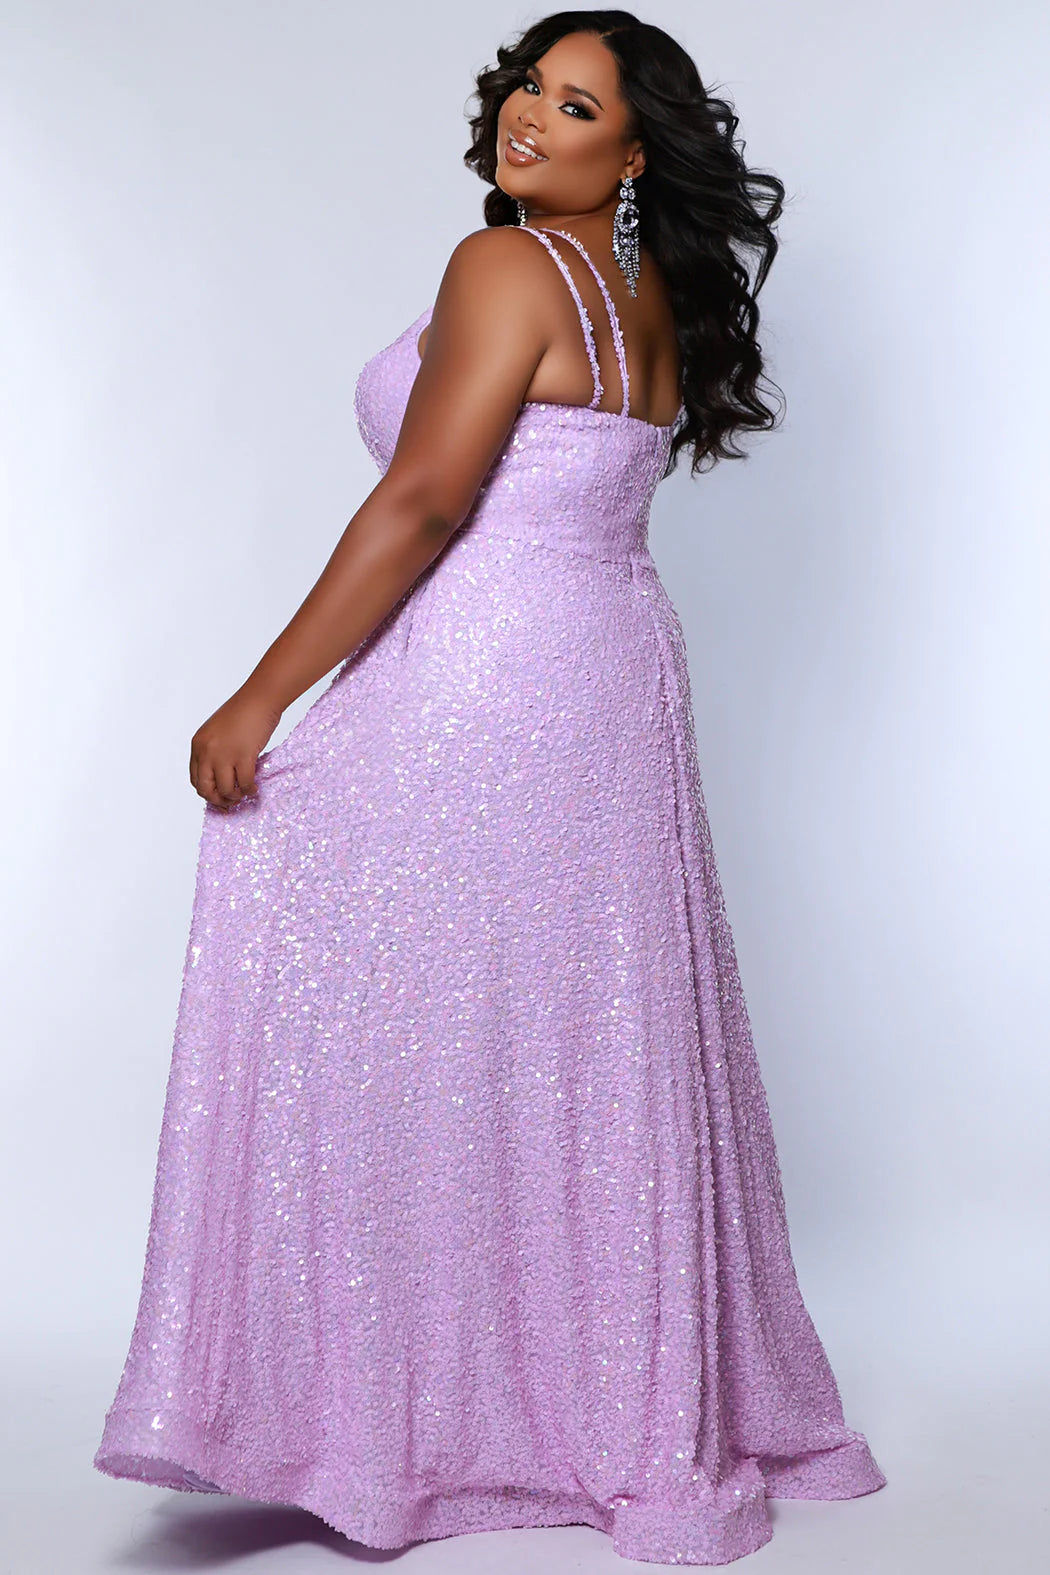 Be the belle of the ball in Sydneys Closet SC7365 Long Prom Dress. This plus size formal dress features an all-over sequin bodice with a scoop neckline, and a gathered A-line skirt with pockets. Perfect for prom nights, the elegant style of this gown will make you feel like a star.